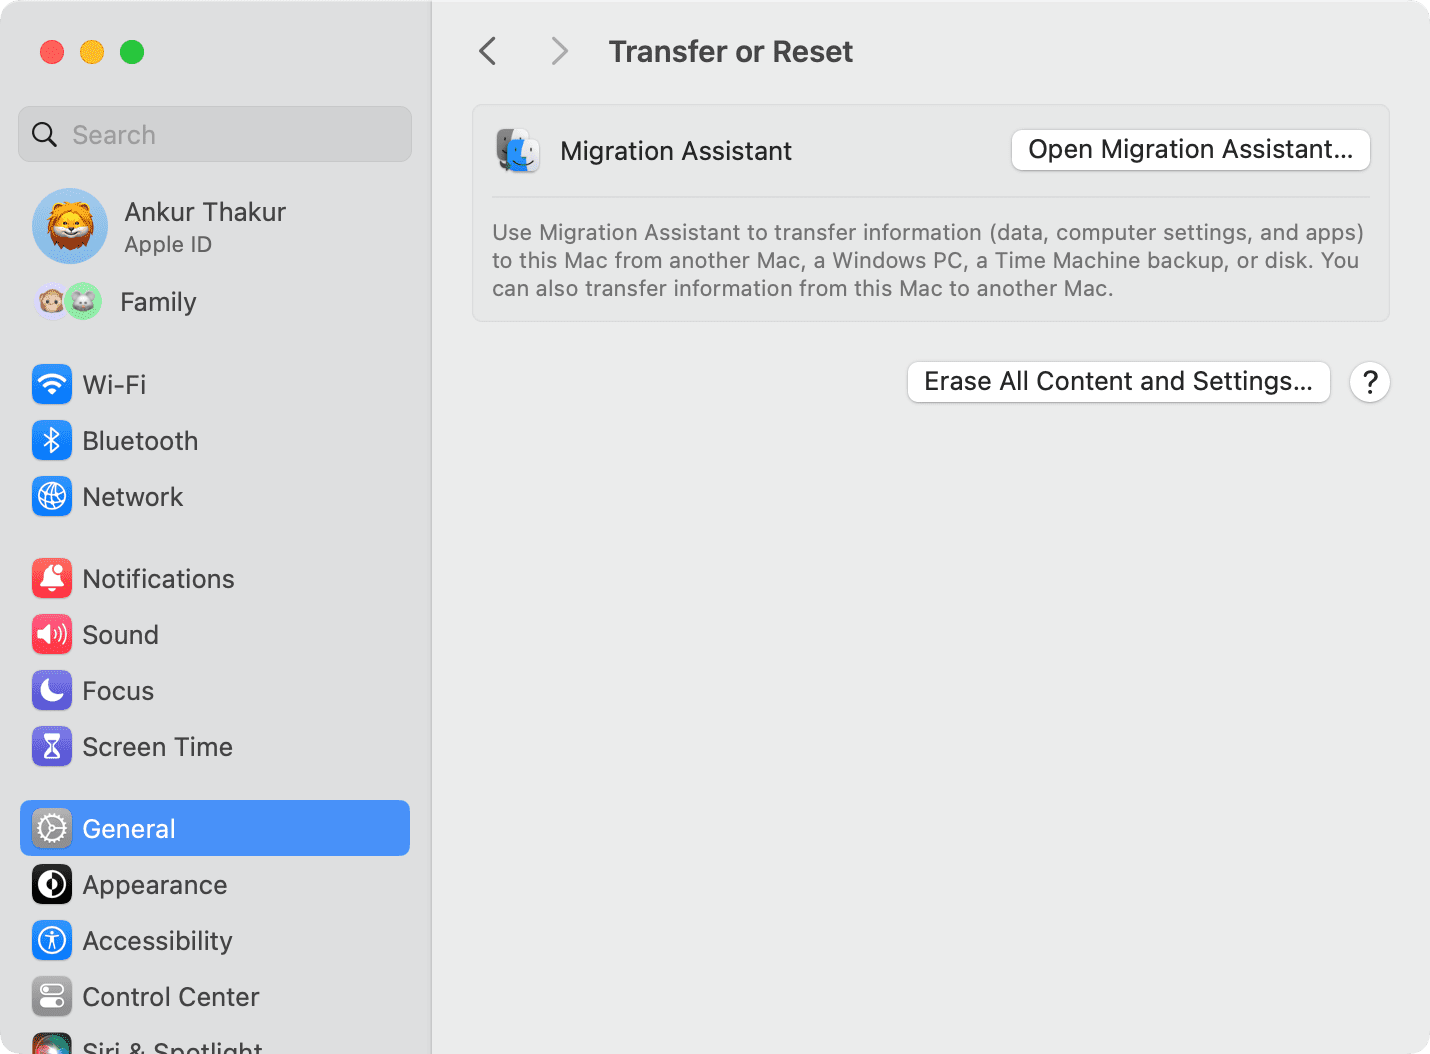 Erase All Content and Settings on Mac